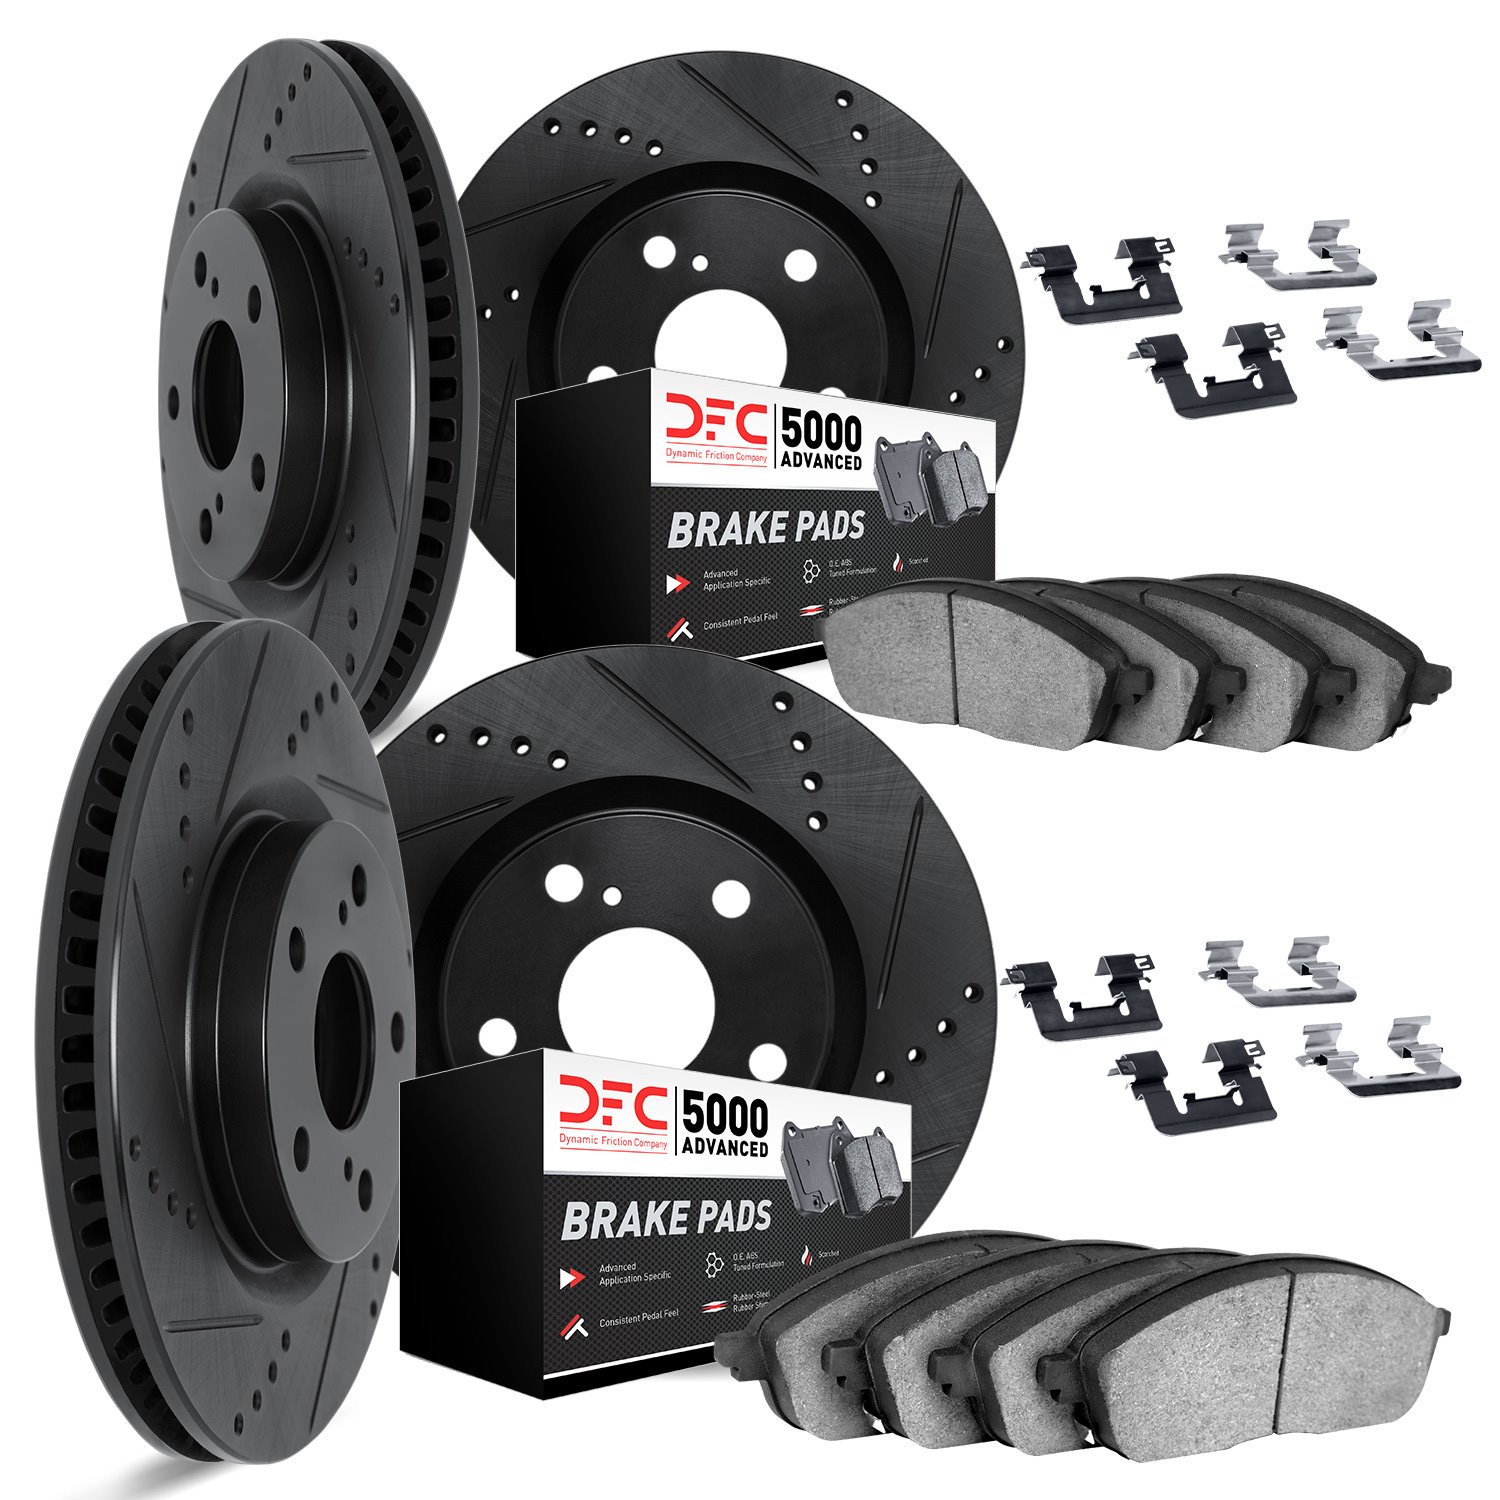 8514-31047 Drilled/Slotted Brake Rotors w/5000 Advanced Brake Pads Kit & Hardware [Black], 2013-2018 BMW, Position: Front and Re